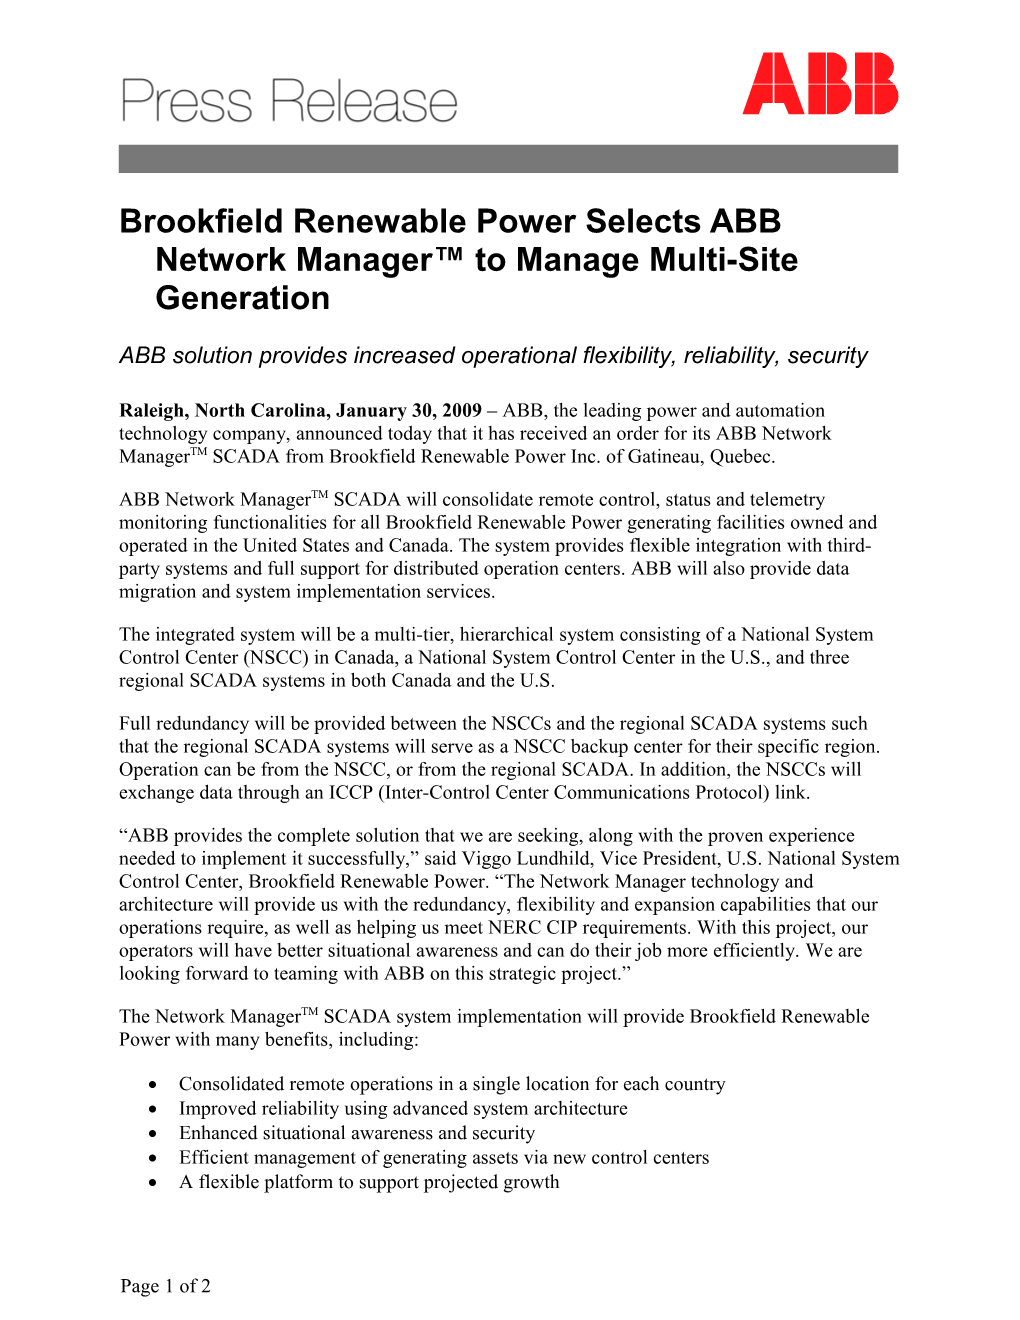 Brookfield Renewable Power Selects ABB Network Manager to Manage Multi-Site Generation